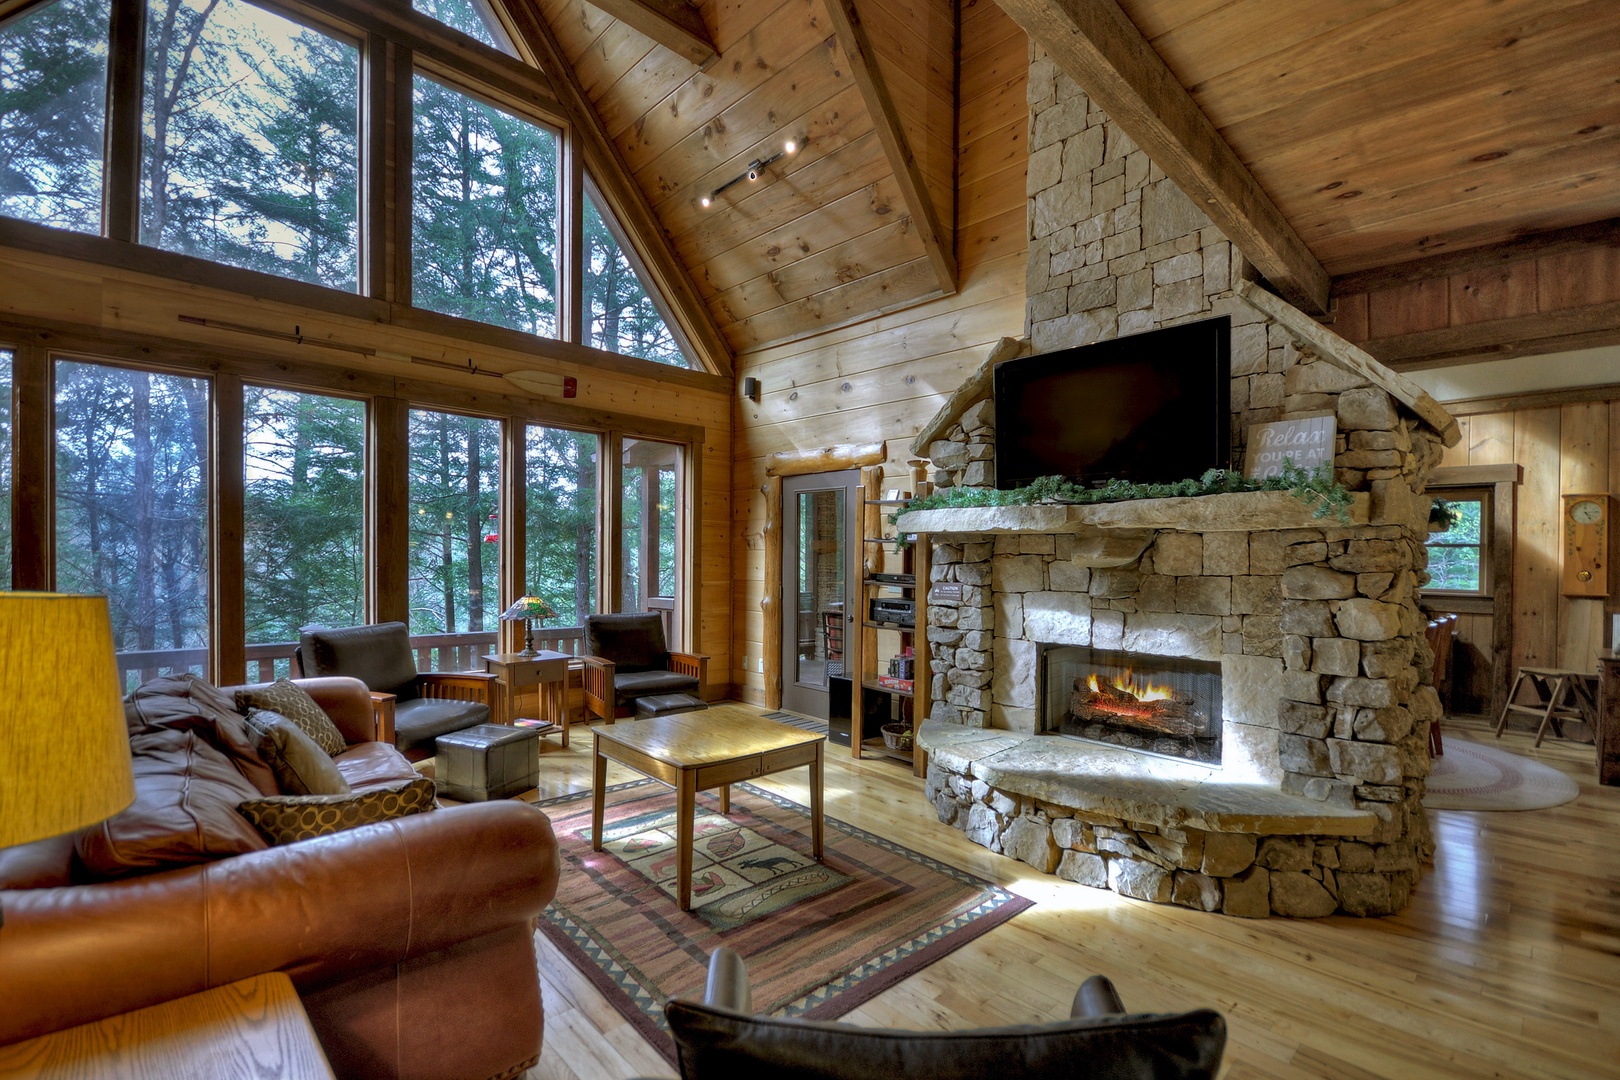 Reel Creek Lodge- Living area with vaulted ceilings and lounge furniture